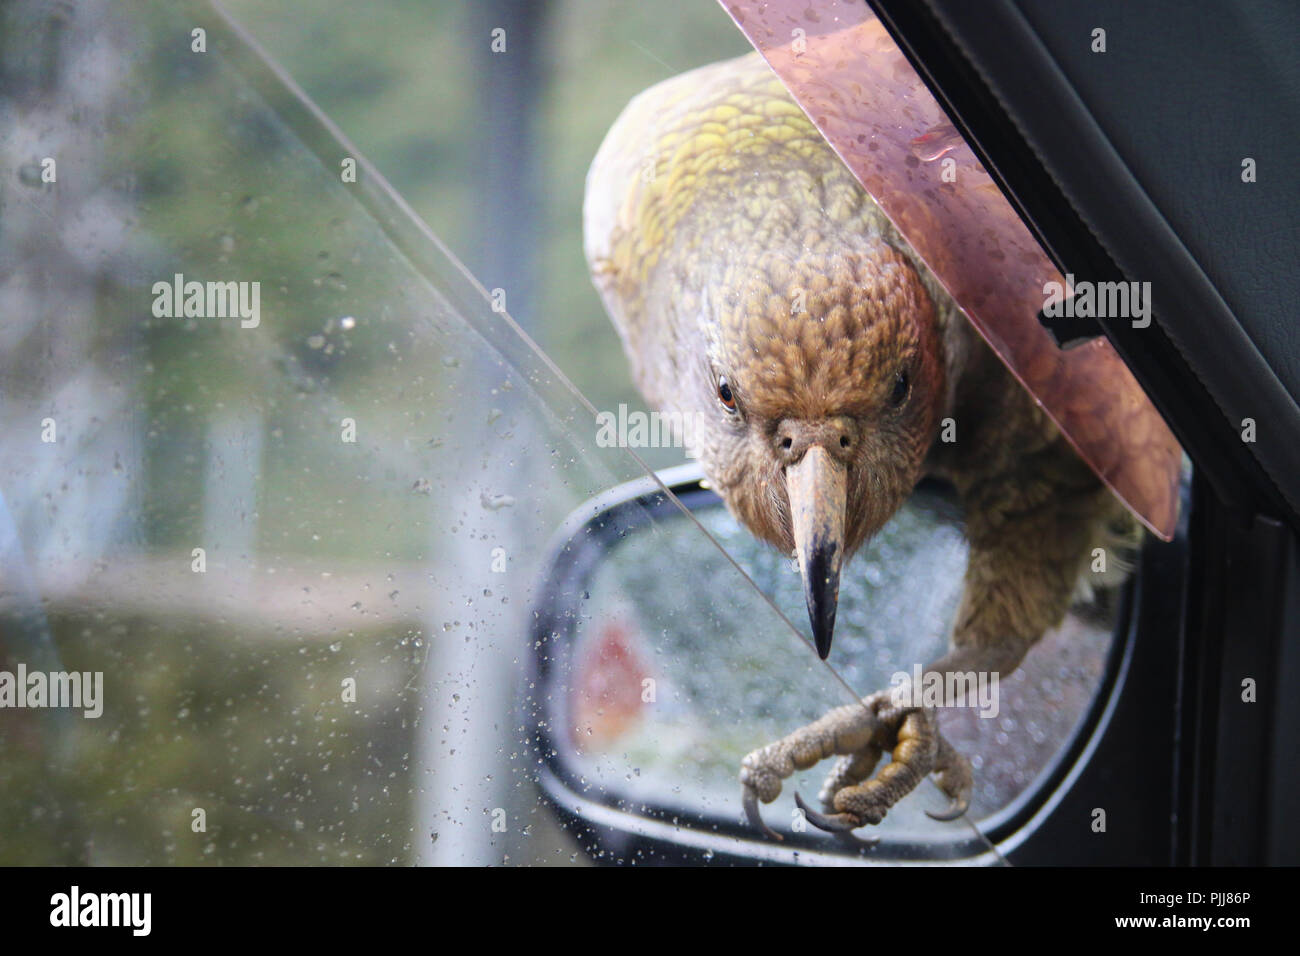 Kea bird the native animal of New Zealand South Island Alps, alpine parrot sitting on car mirror and trying to break in through the window Stock Photo